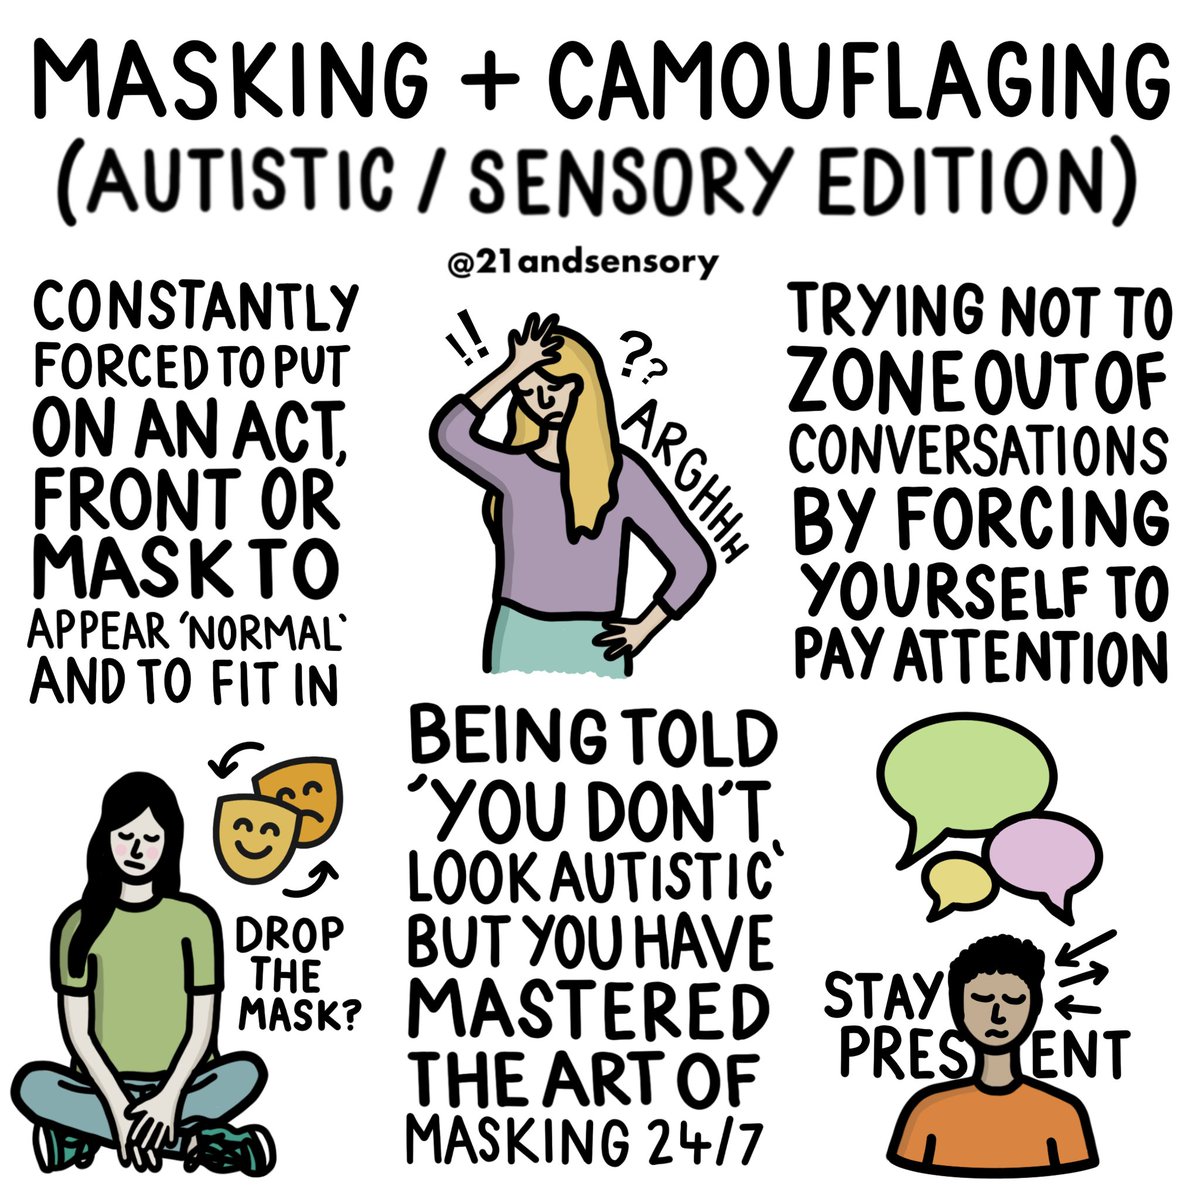 Emily @21andsensory ✏️🎙 on Twitter: "Hi! I did a series of drawing Masking and Camouflaging as an autistic person. Masking involves trying to hide being autistic so others will accept us.